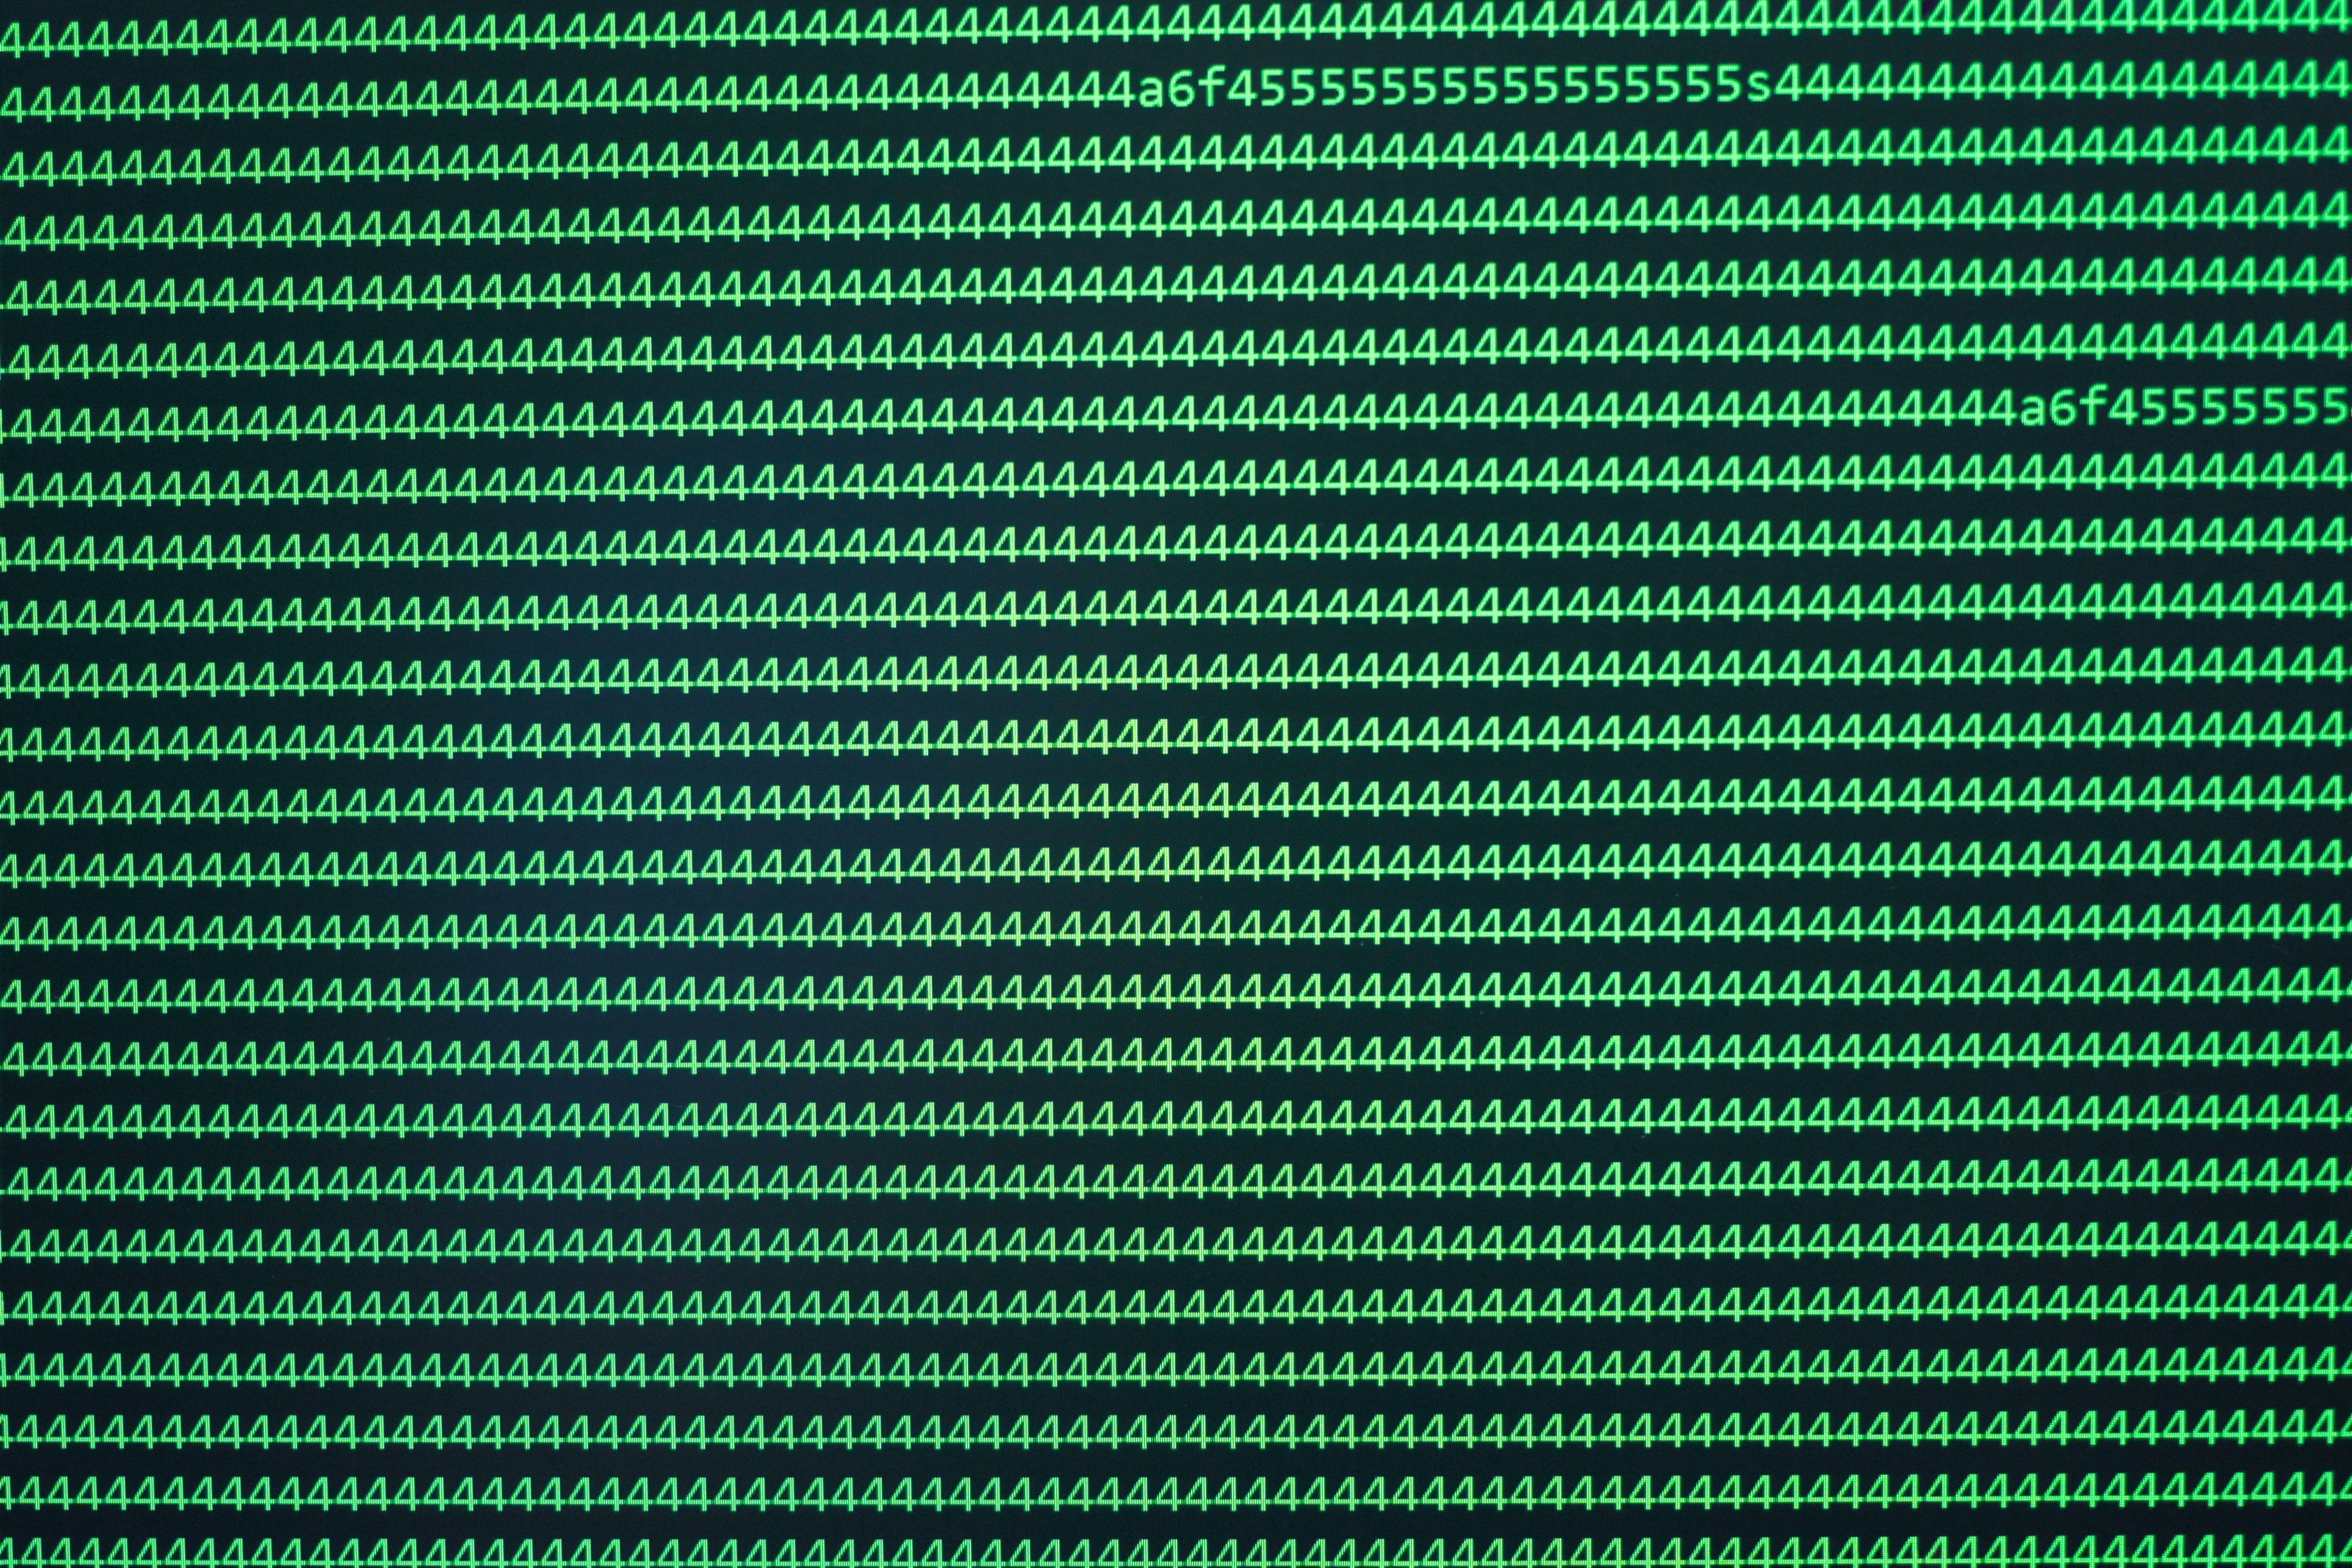 matrix, green, code, miscellanea, miscellaneous, line, numbers, strings Phone Background